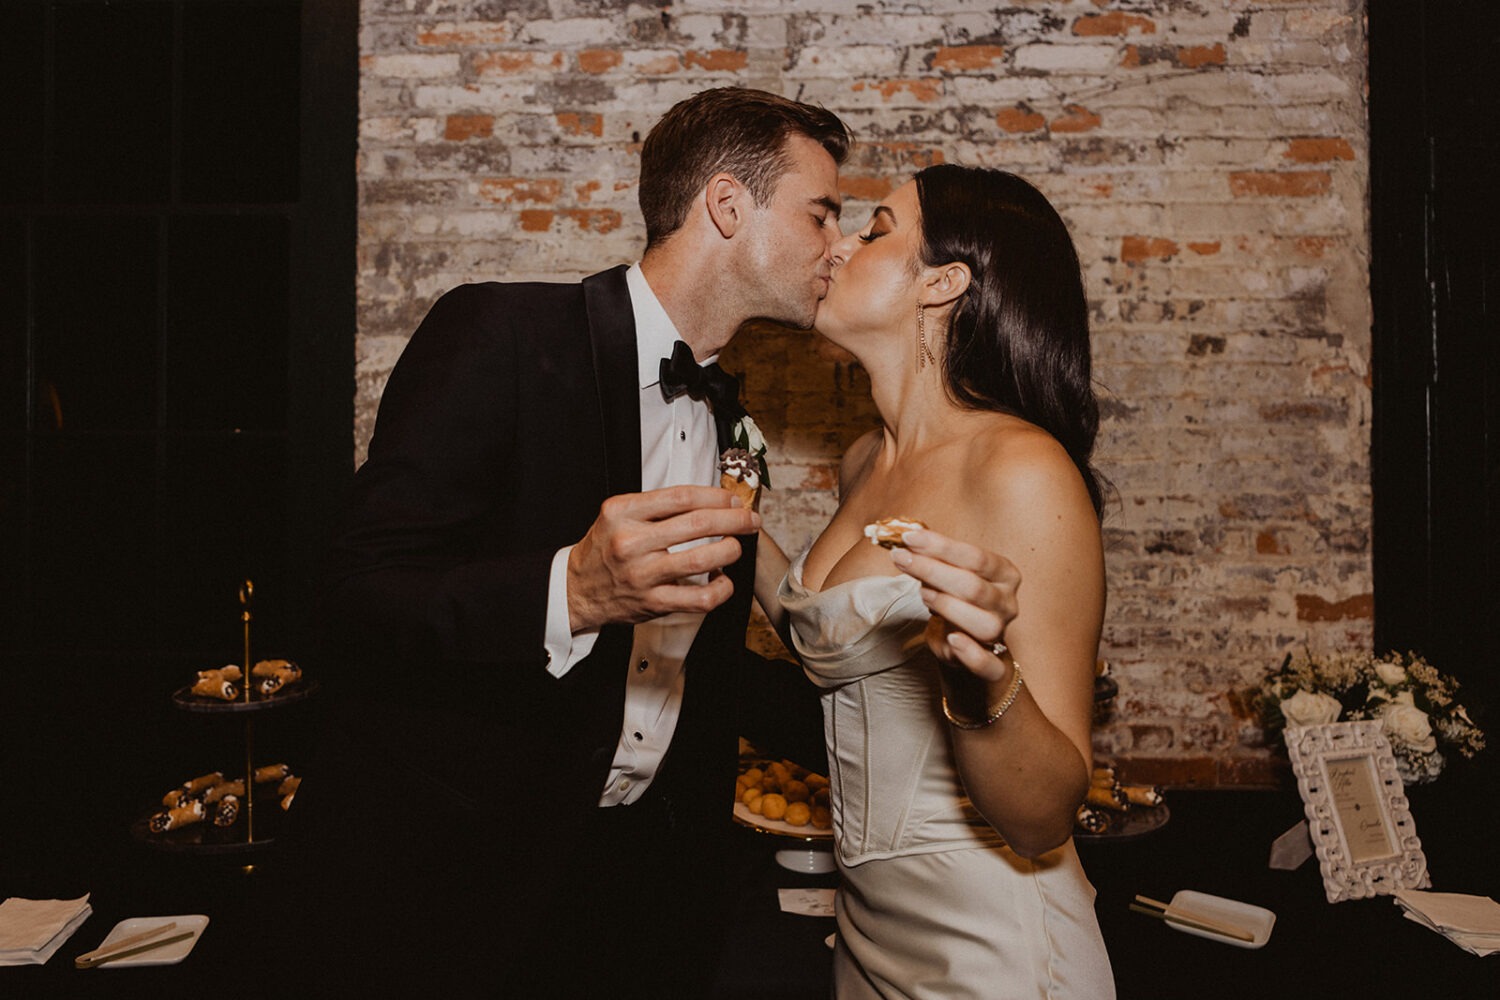 couple kisses while holding dessert at wedding reception 